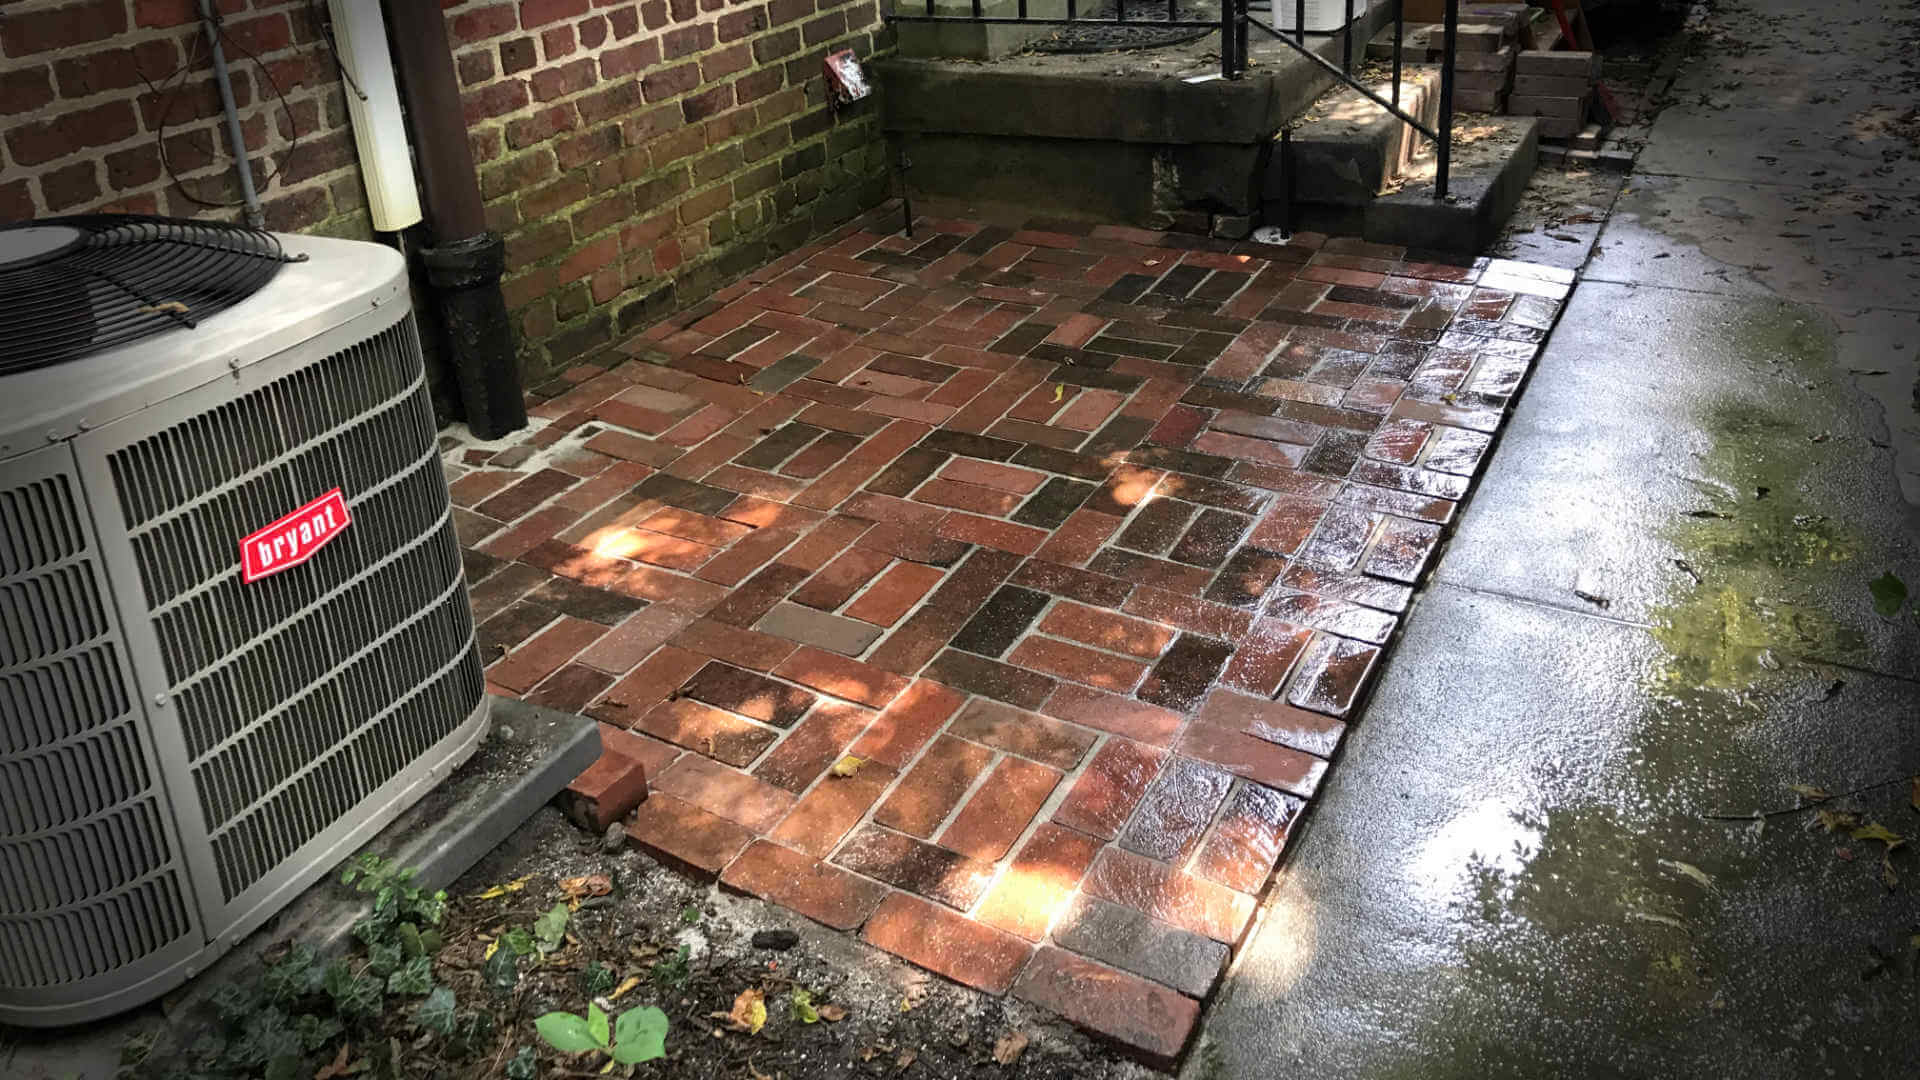 If you didn't already catch the article, Jenni used the brick patio project as the basis for her fear of DIY projects article!